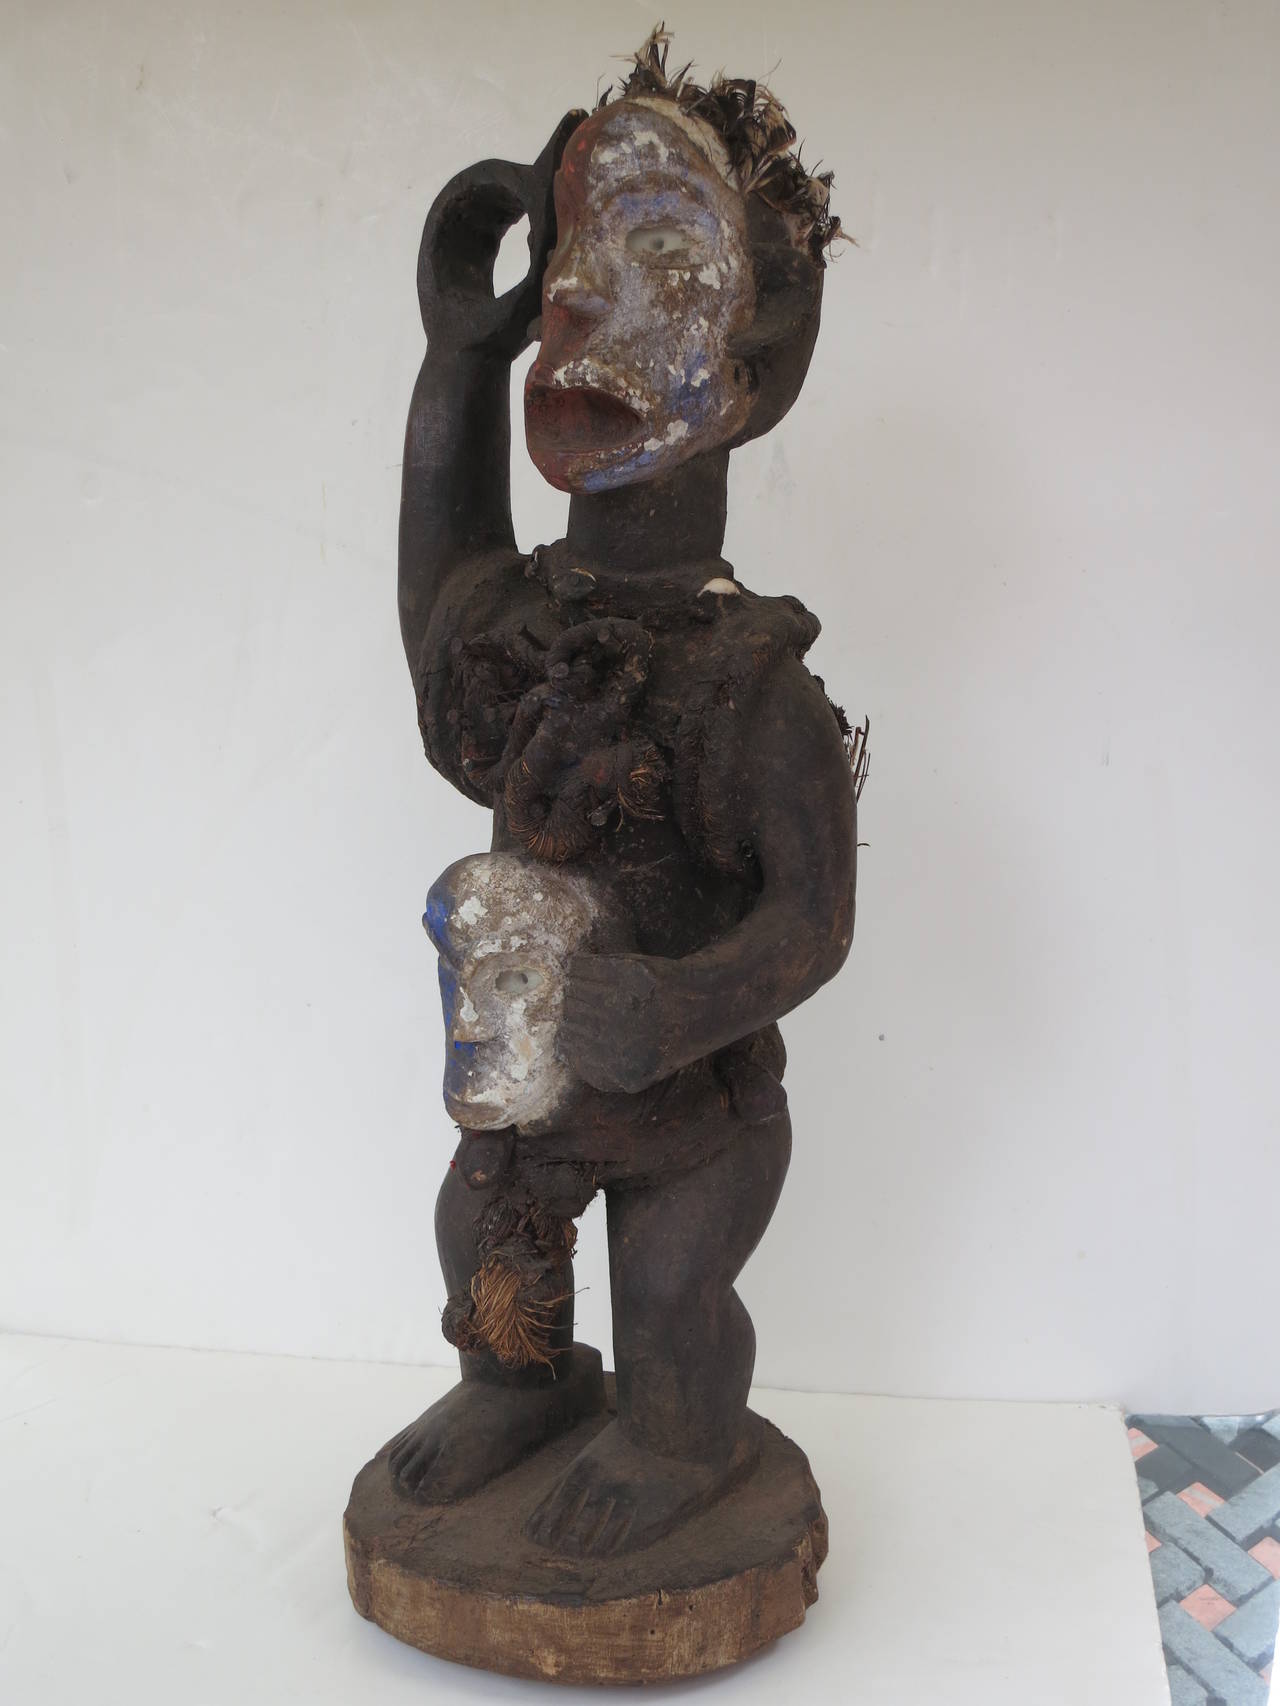 This Bakongo power figure is adorned with feathers, shells, nails and raffia. The eyes of the figure and the mask he holds are of inset glass. Magic bundles are attached to the torso both front and back. Paint is applied to the face of the figure